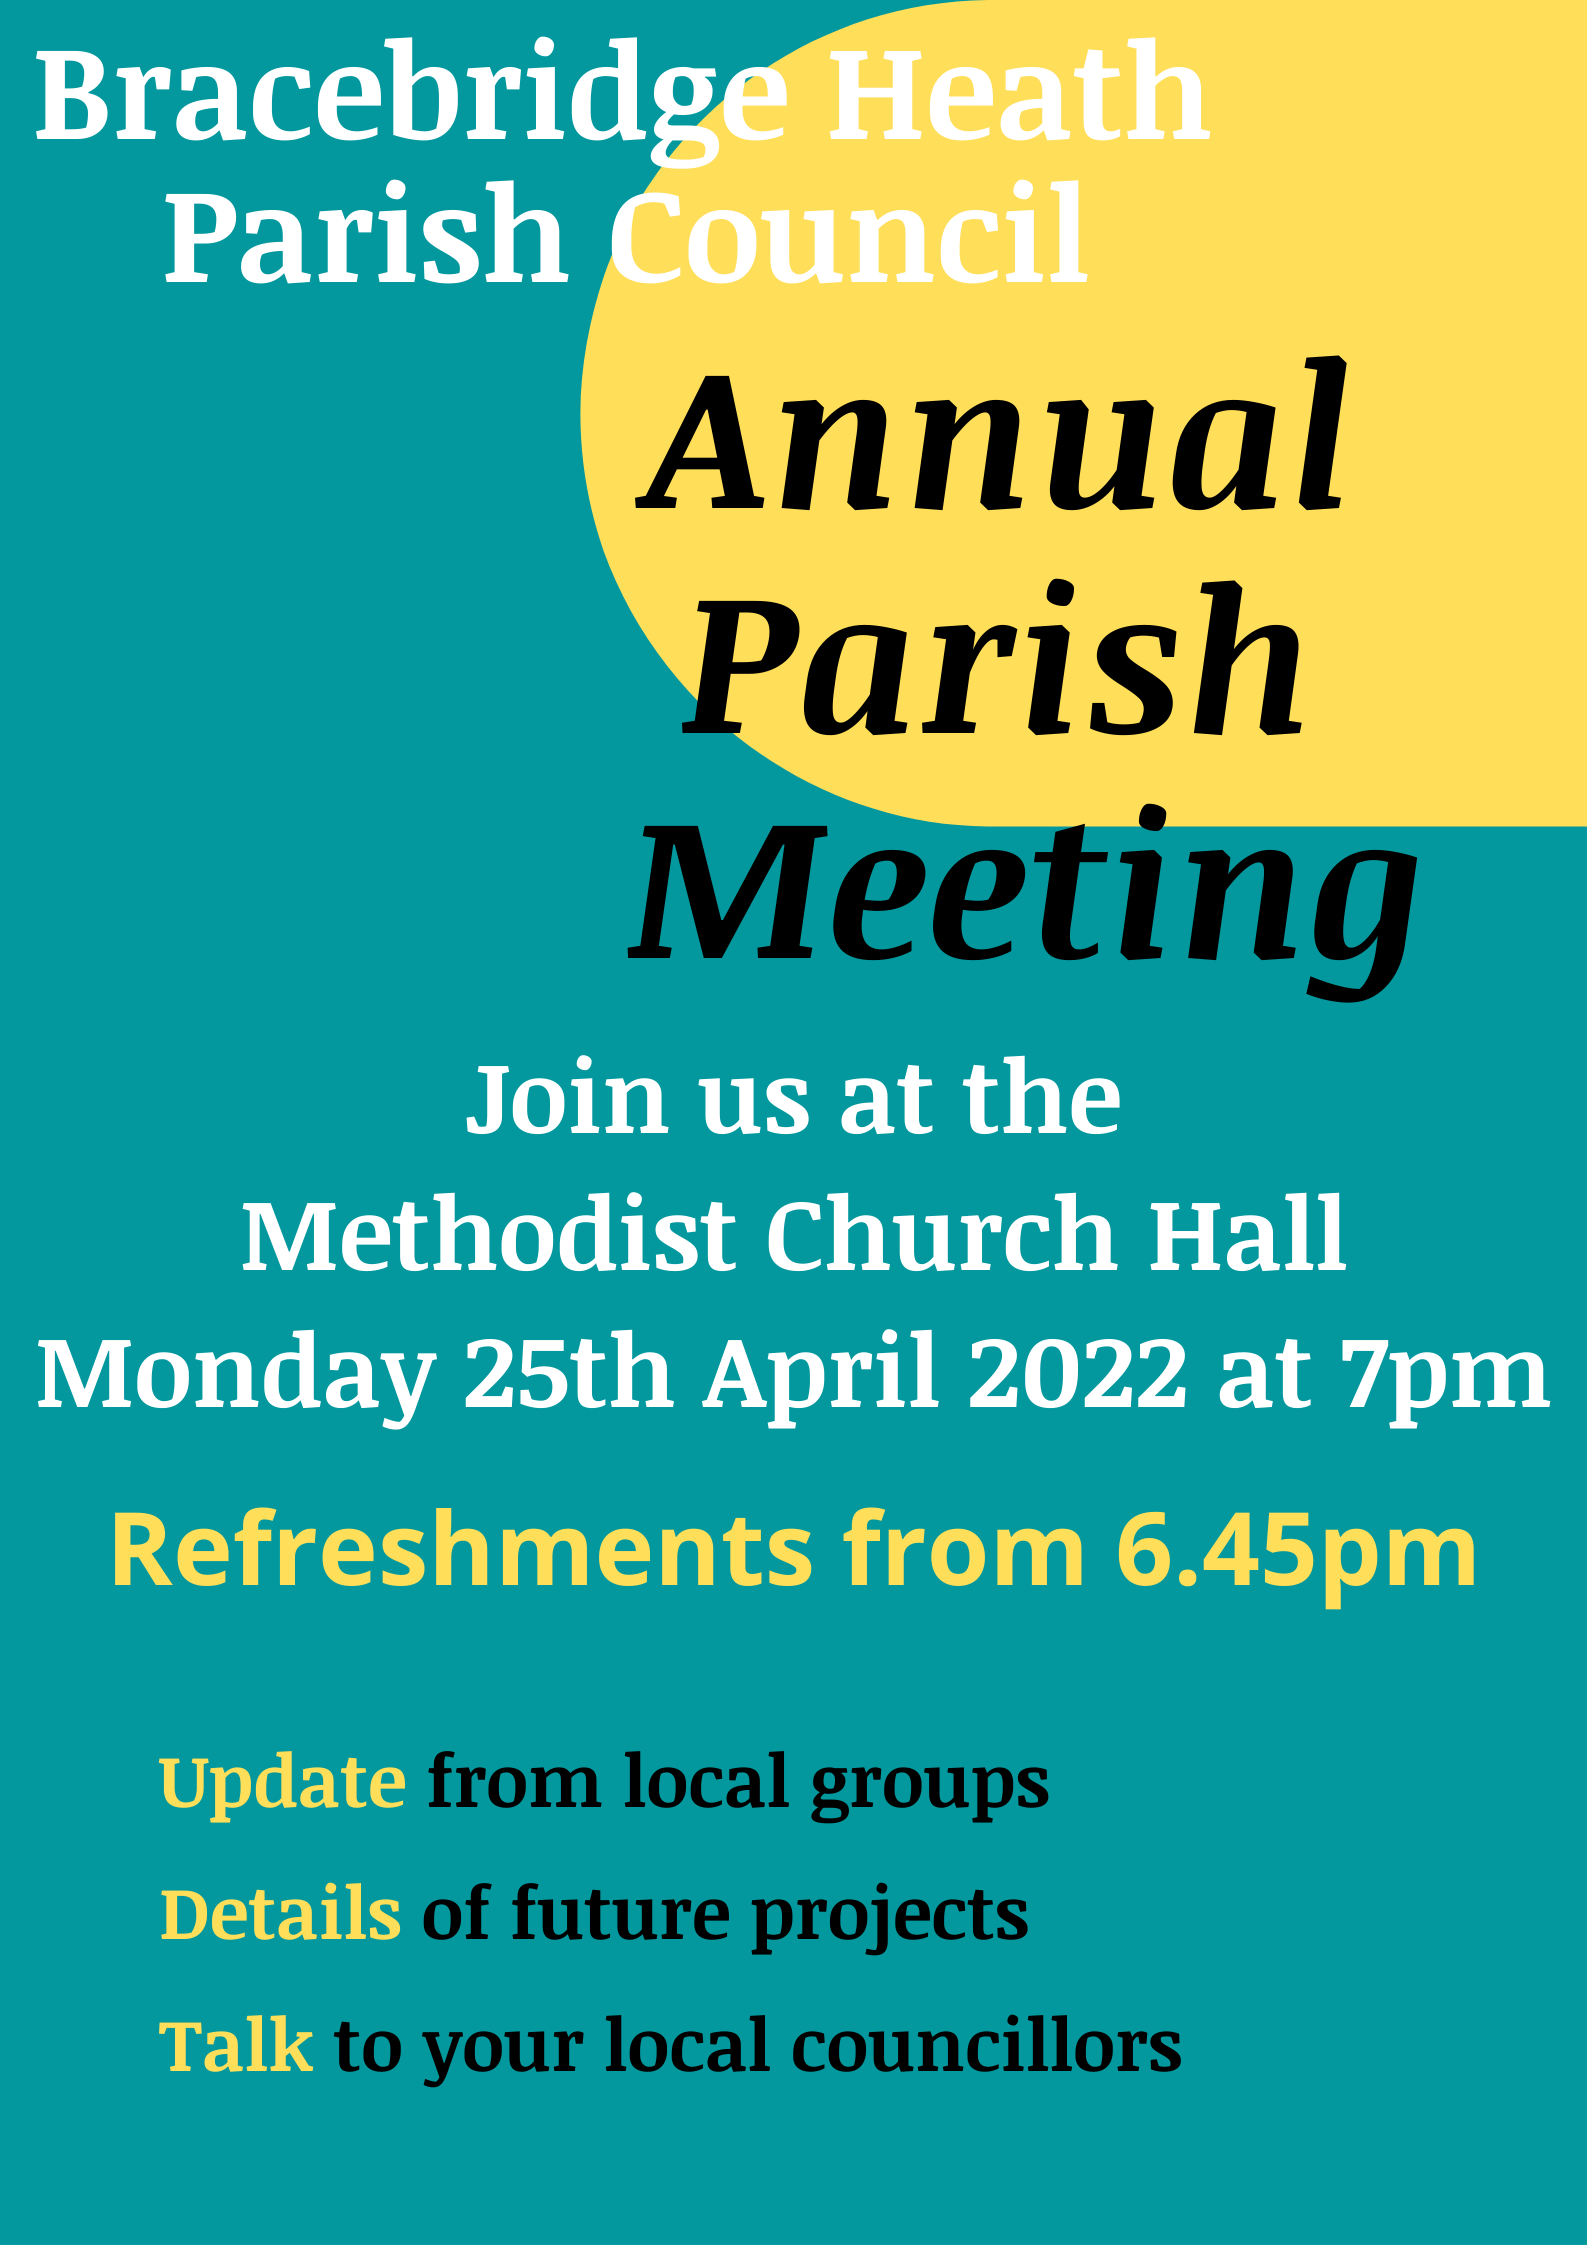 Information about the Annual Parish Meeting